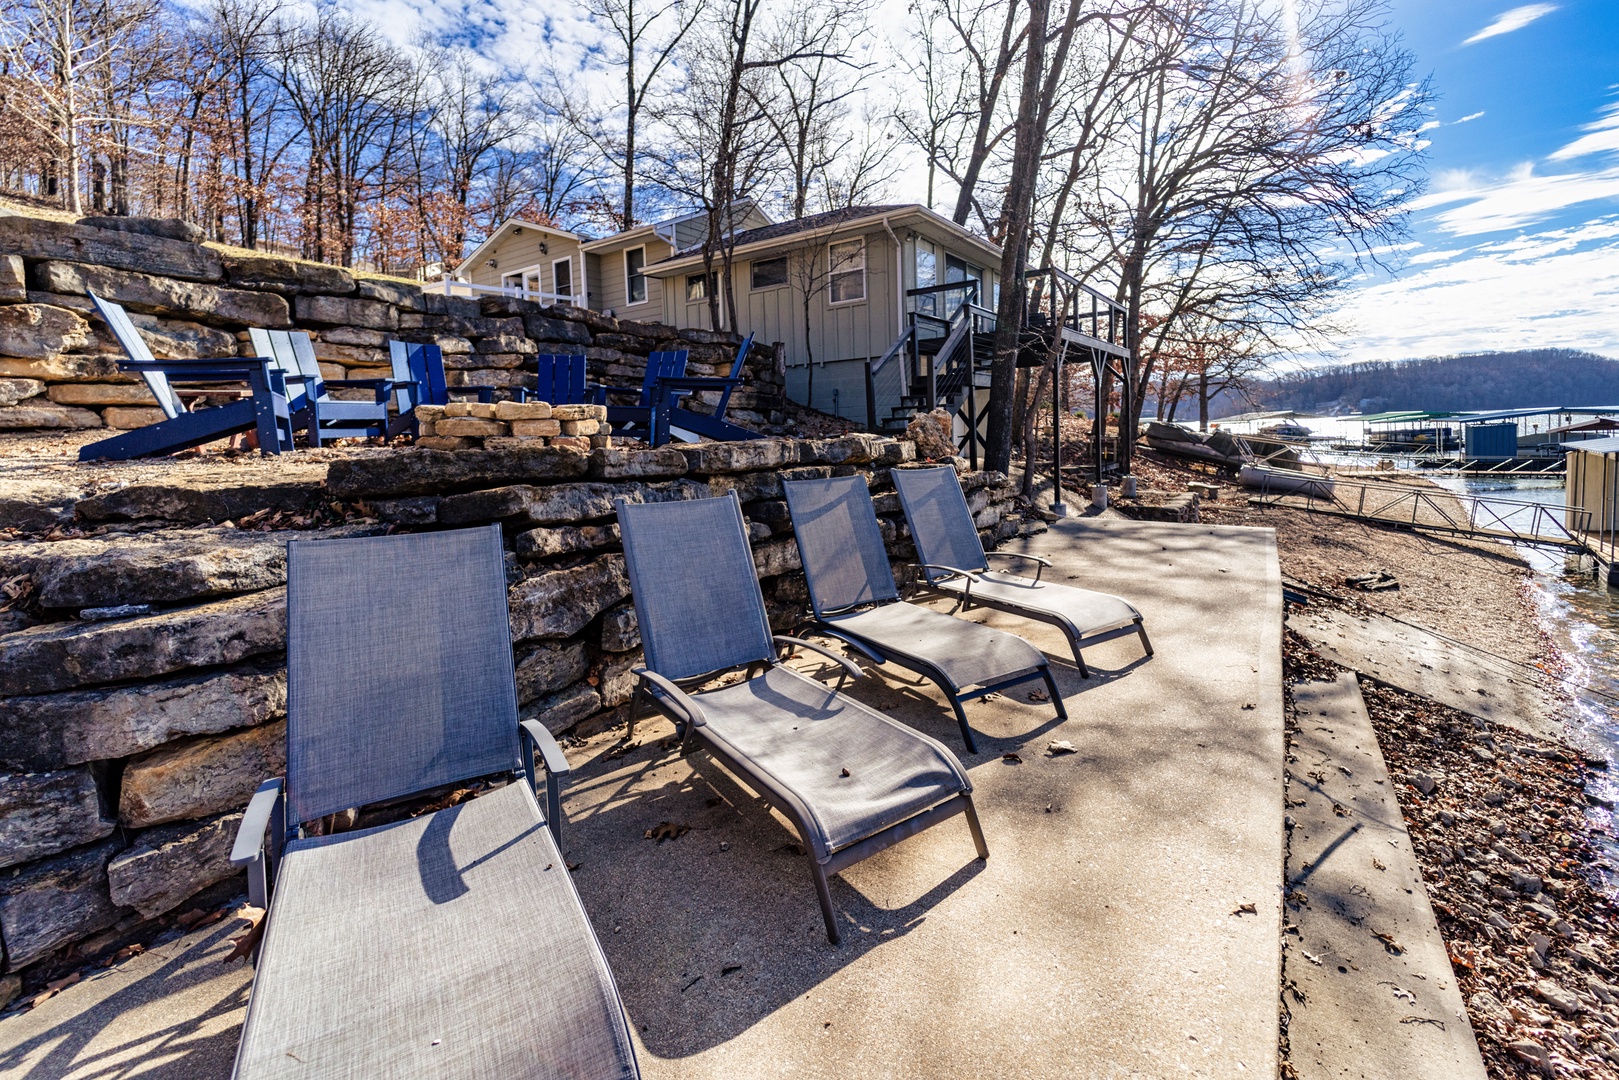 Lounge by the lake & soak in the sun!